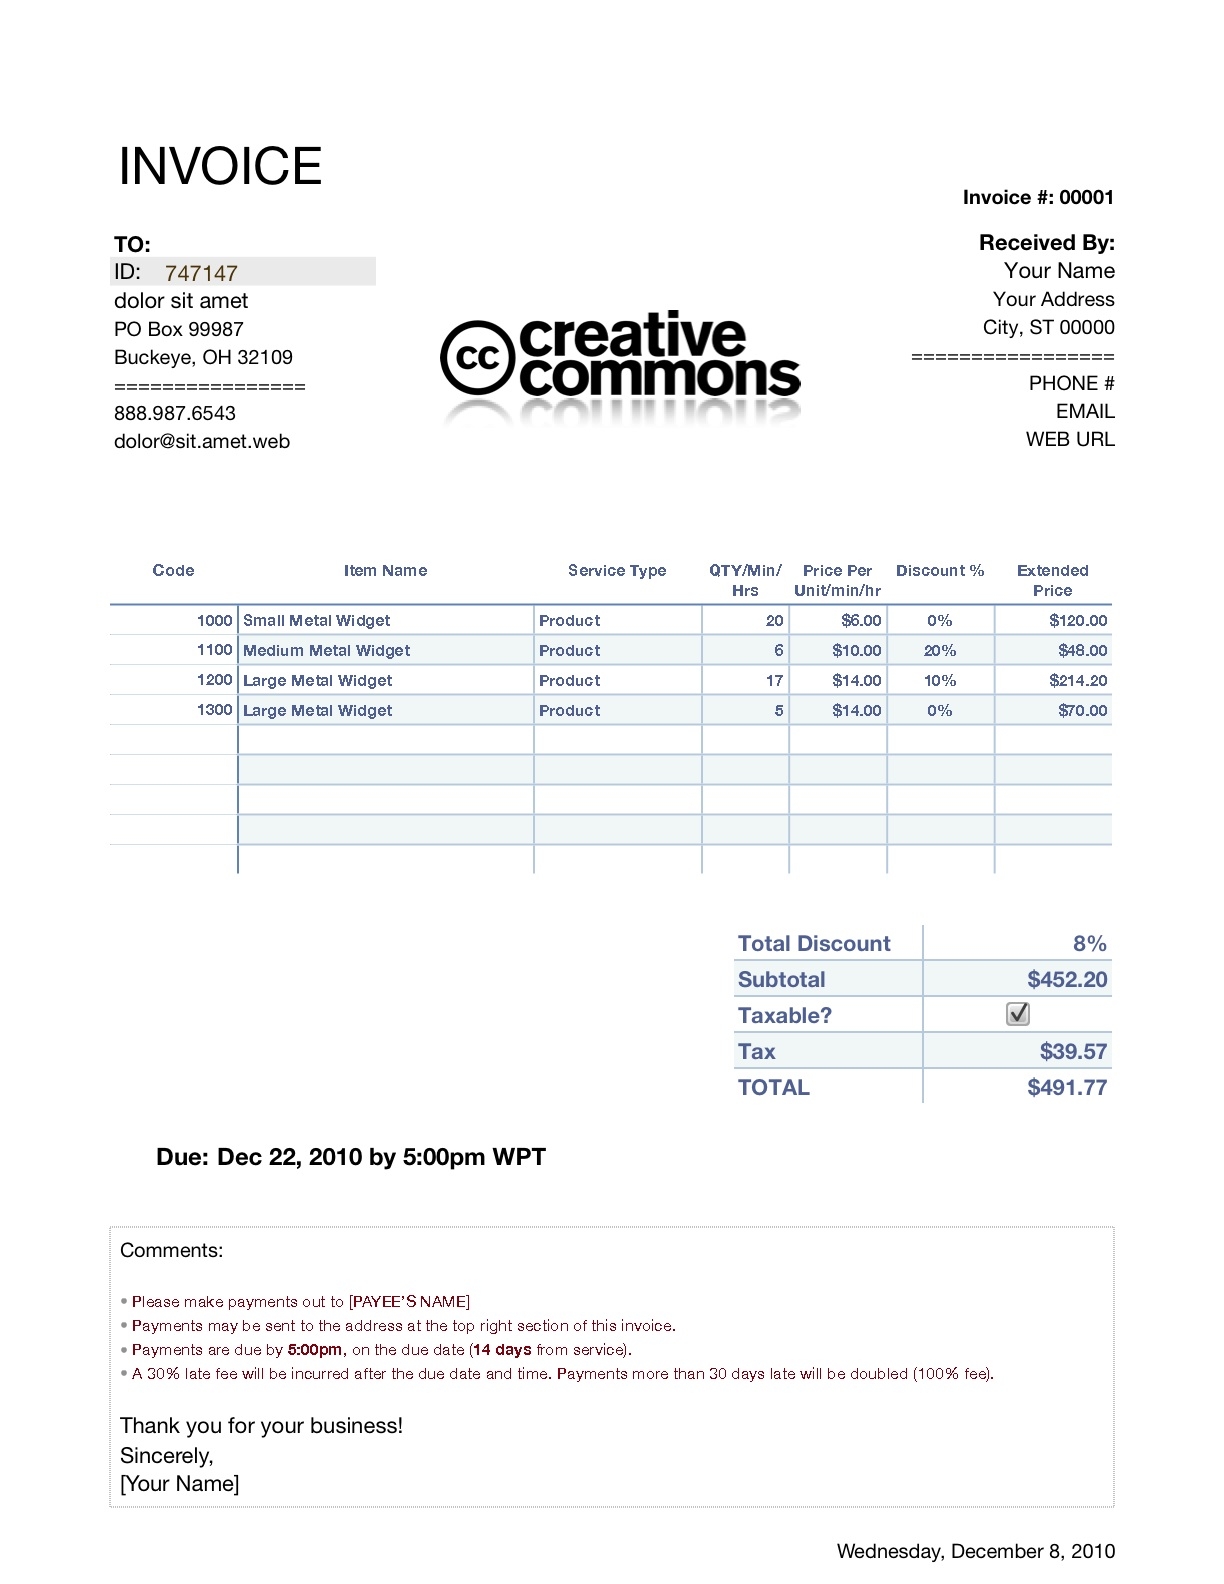 invoice number